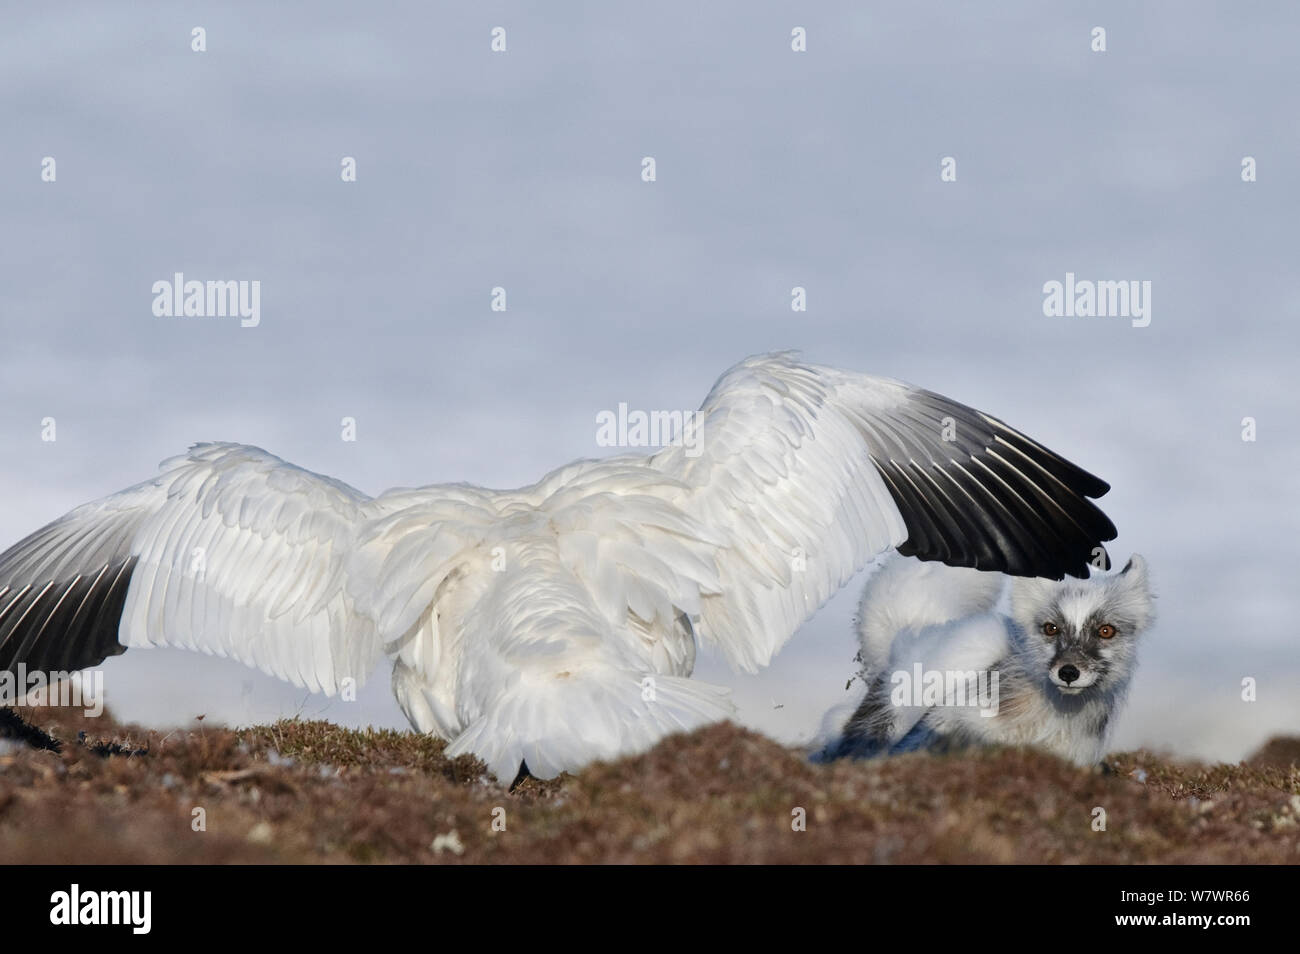 Snow goose (Chen caerulescens caerulescens) with wings out stretched, chasing way Arctic fox (Vulpes lagopus) Wrangel Island, Far Eastern Russia, June. Stock Photo